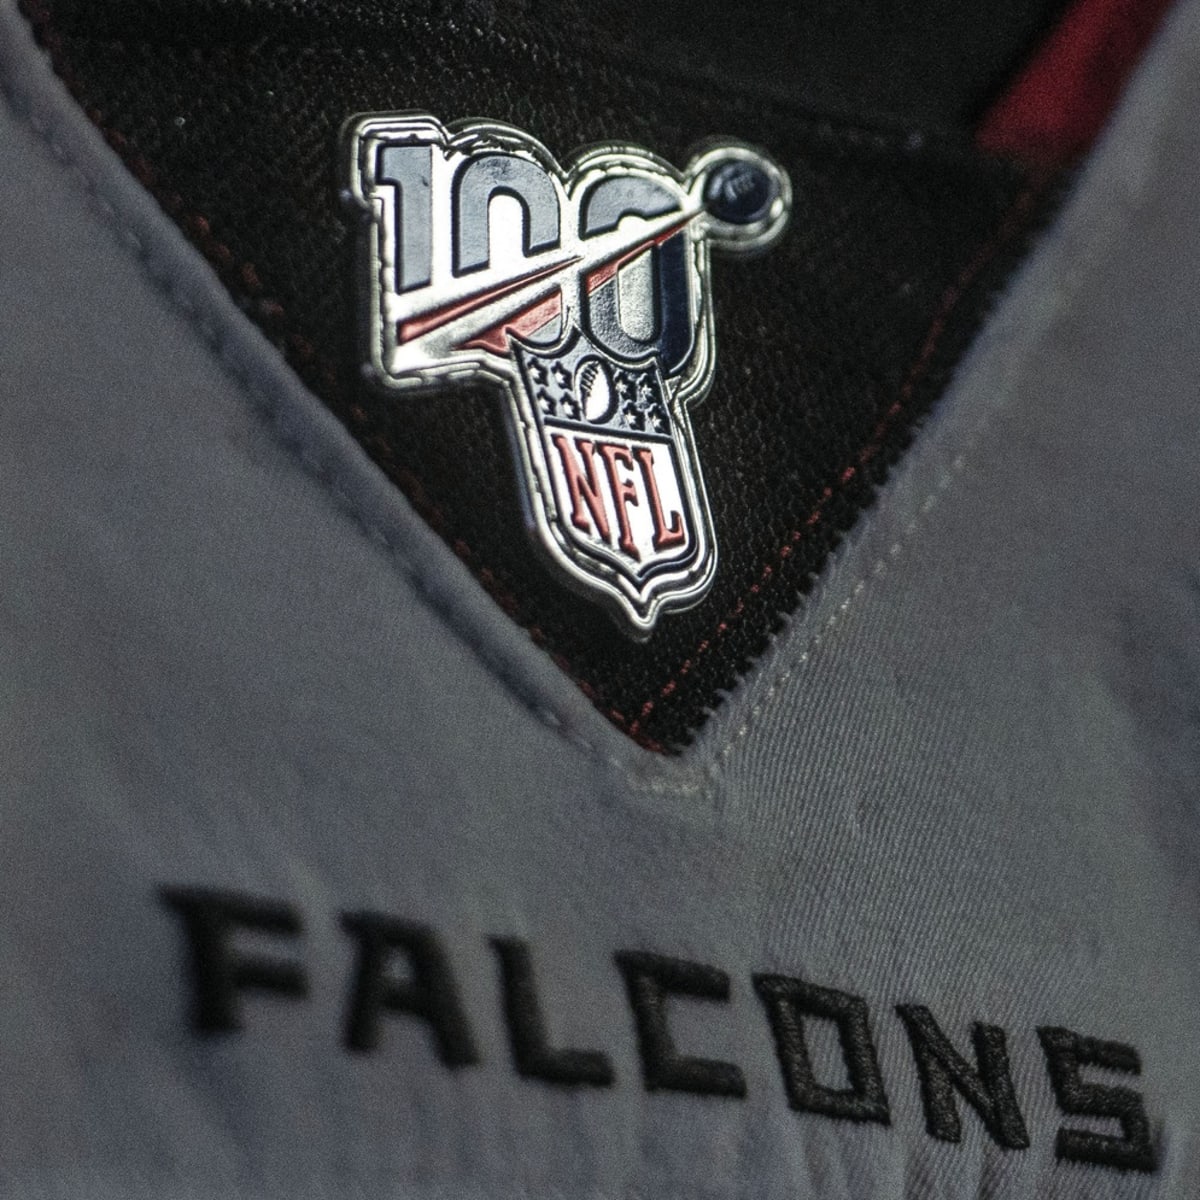 Falcons' jersey schedule for 2020 season